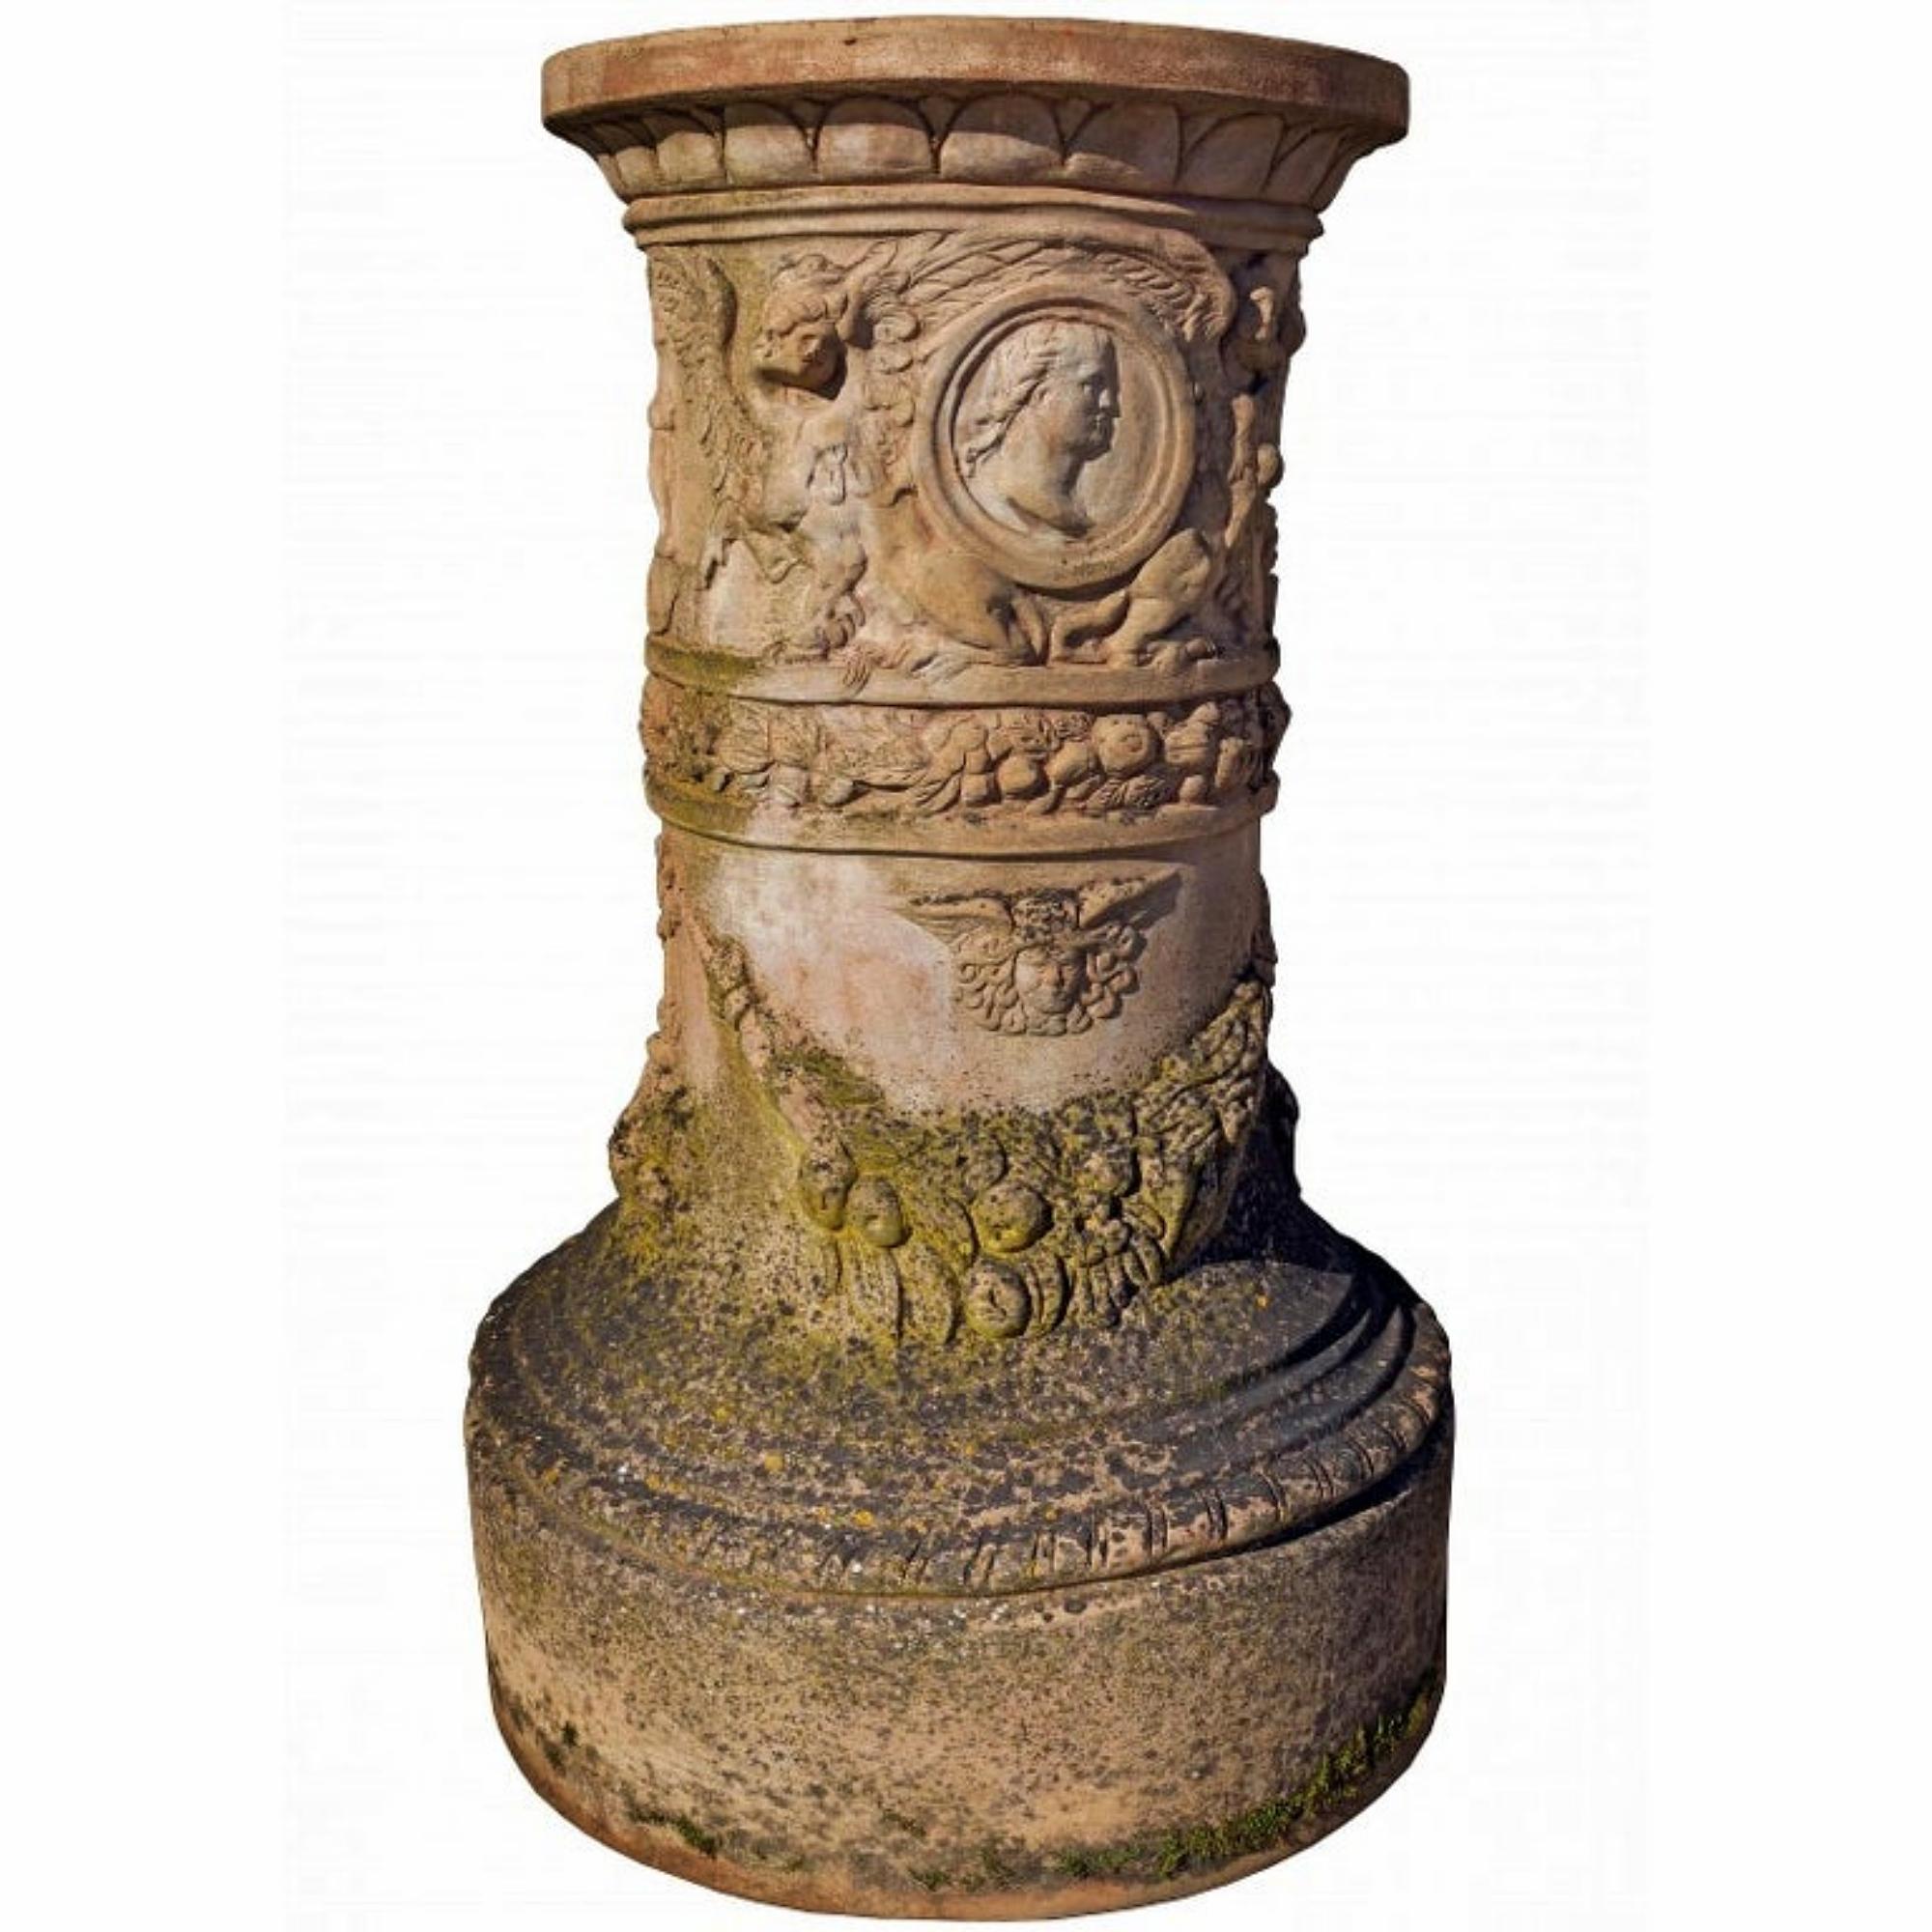 Column support for statues and vases Ricceri.

Square column in terracotta end 19th century.
To be used as a support for vases, busts, sculptures etc.
From a cast of the ancient Ricceri Manufacture.
Measures: height 80 cm
drum diameter 30